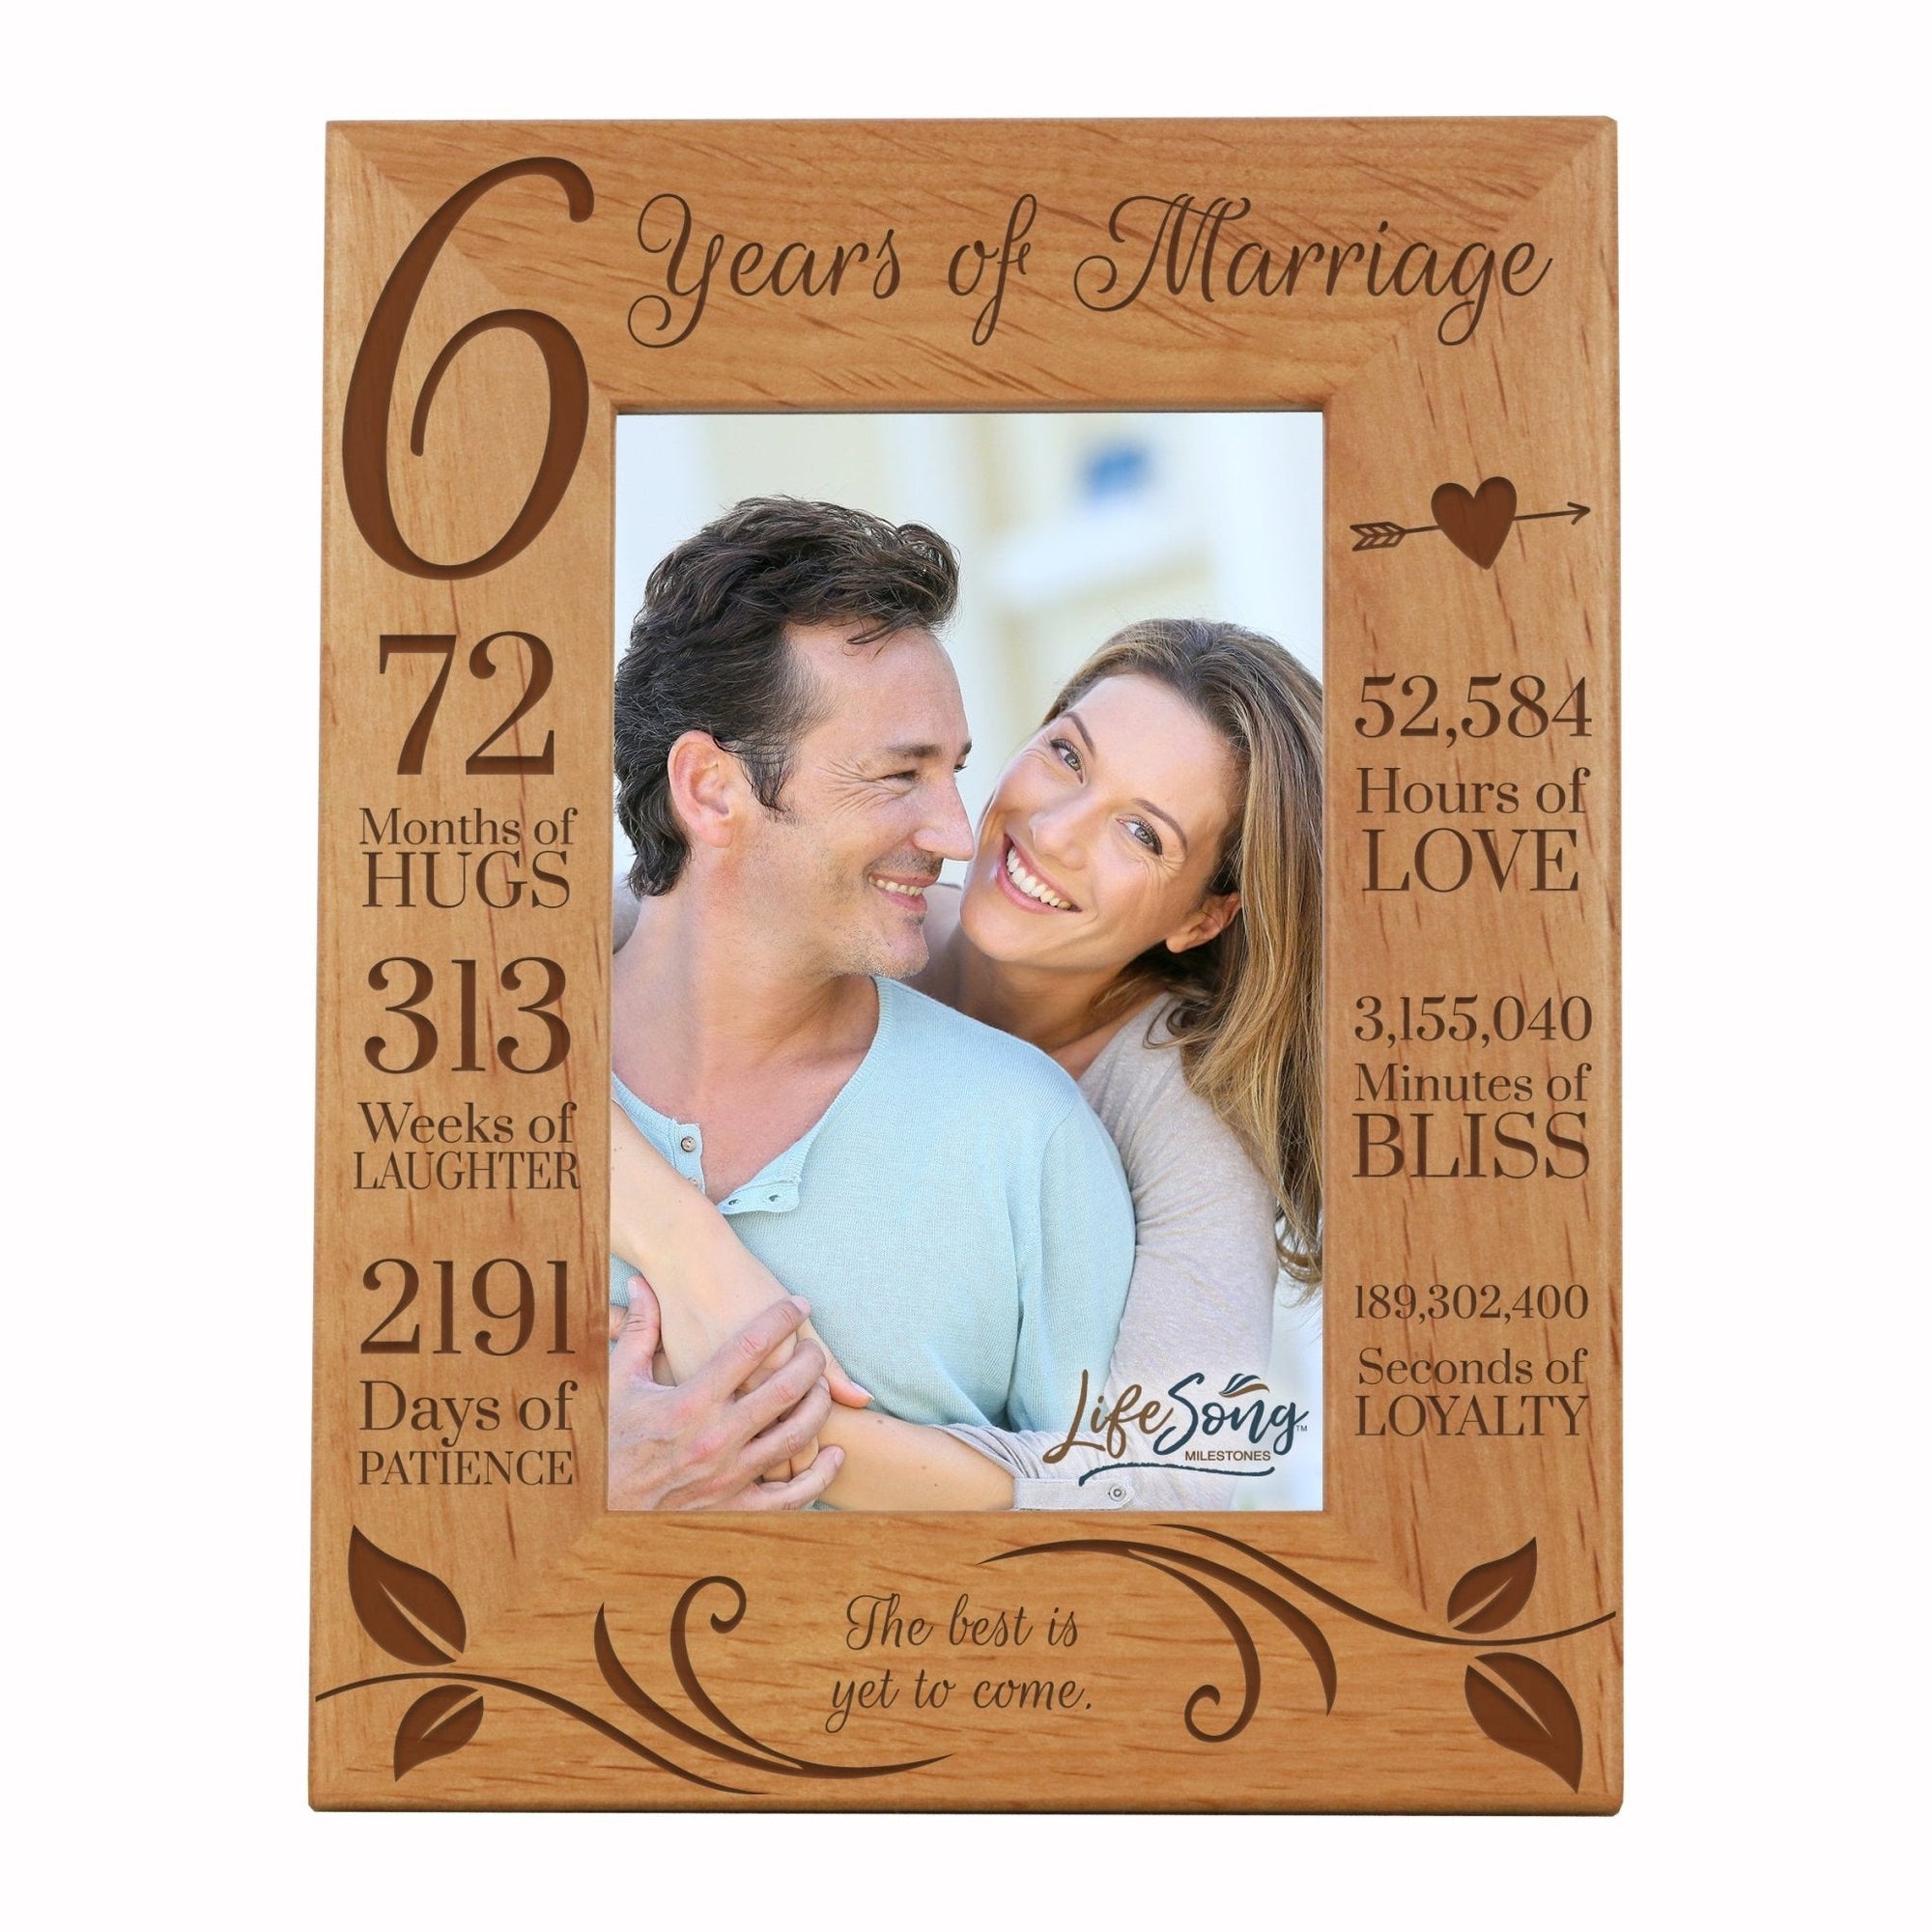 Engraved 6th Wedding Anniversary Photo Frame Wall Decor Gift for Couples - Yet To Come - LifeSong Milestones